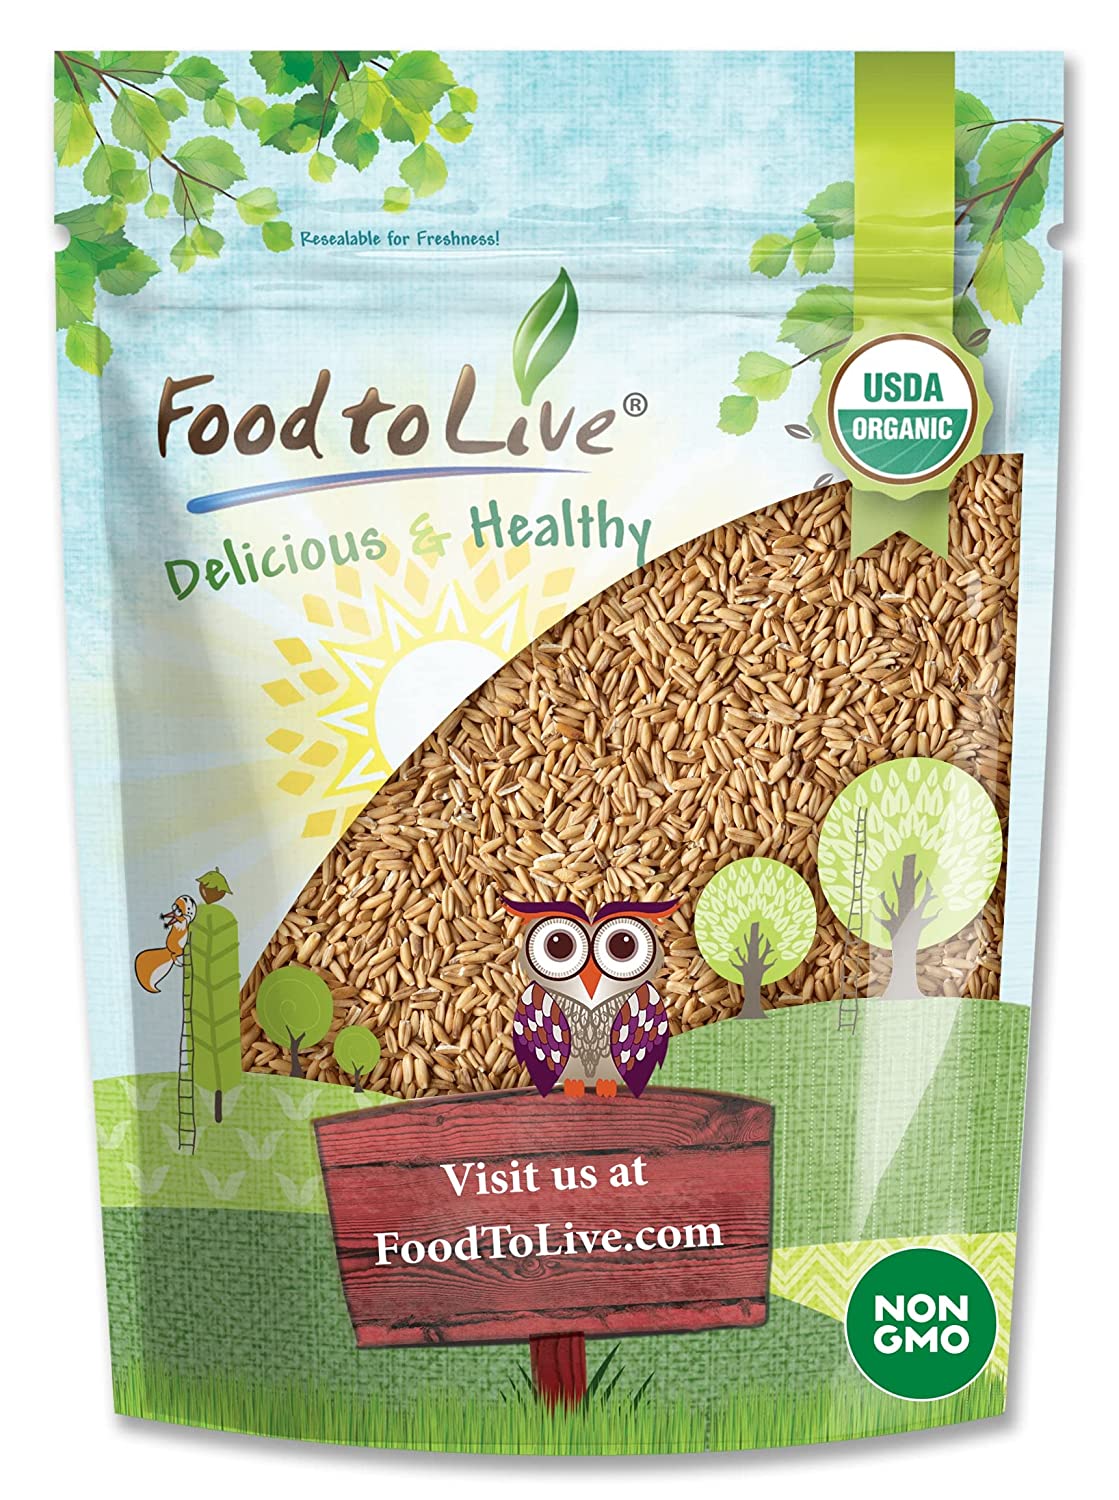 Organic Oat Groats — 100% Whole Grain, Non-GMO Seeds, Kosher, Raw, Non-Irradiated, Vegan, Bulk, Low Glycemic - by Food to Live